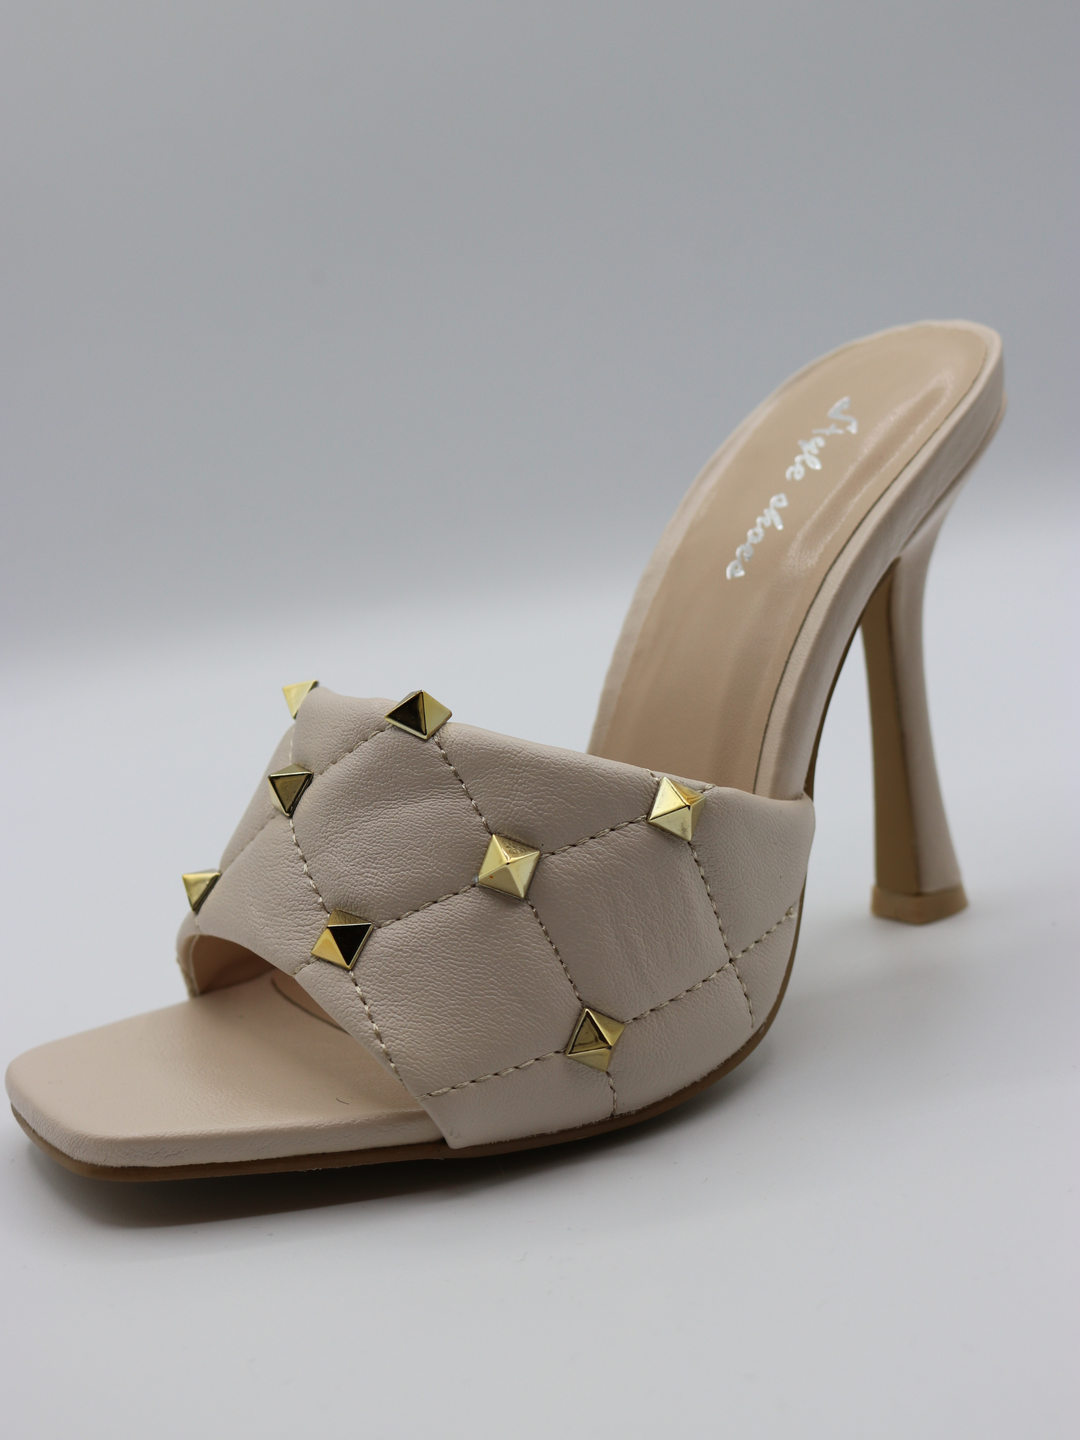 Cream quilted faux leather mule heels with gold studded heels. Photo shows the shoes from the side.  